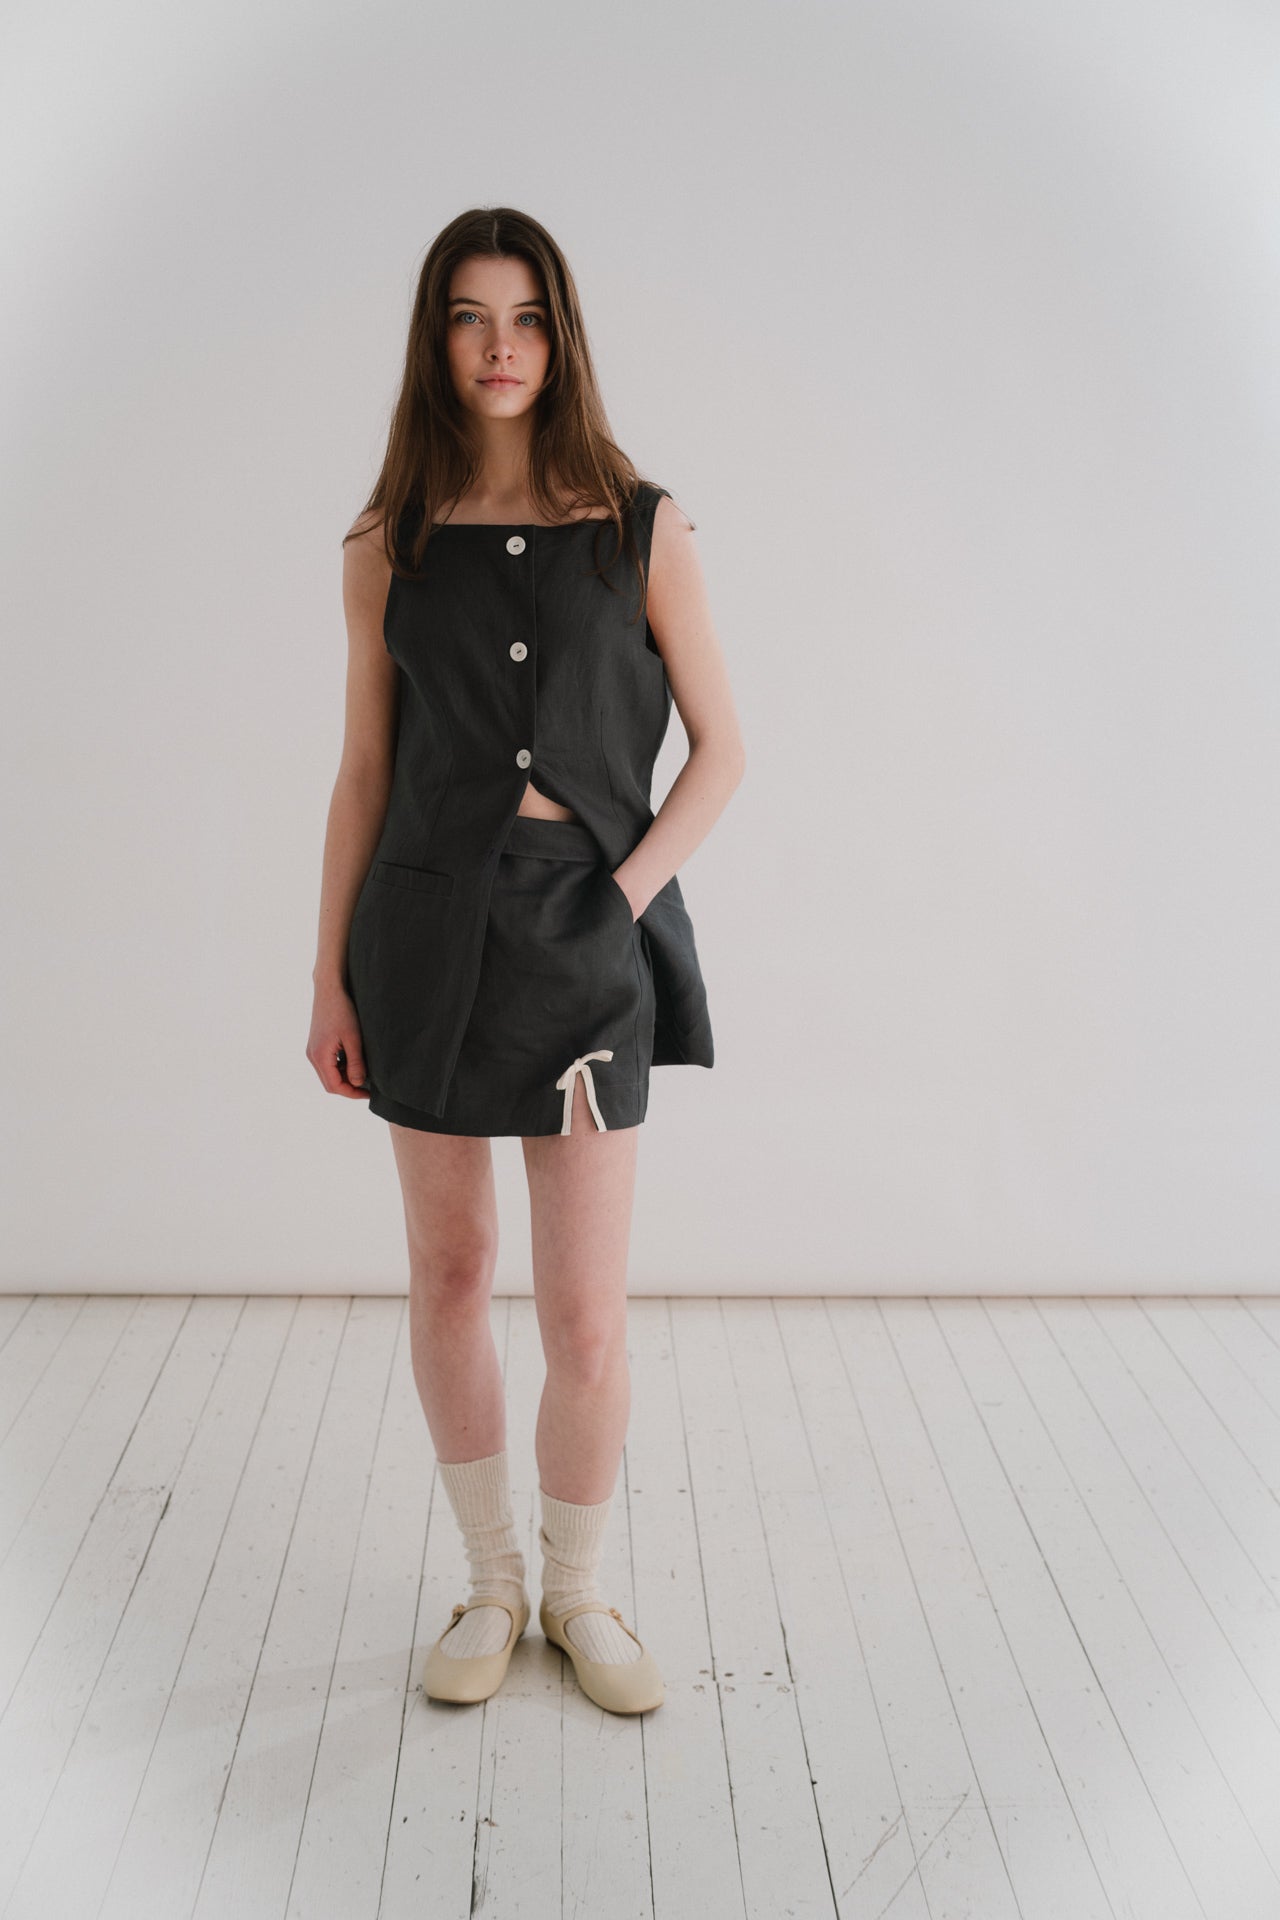 THE MIA MINI - MIDNIGHT | Our very first mini - the Mia skirt has been designed to be the throw on piece that you will continue to reach for this Summer. A delicate bow detail on the front right gives it a little something special. Flat waistband at the f